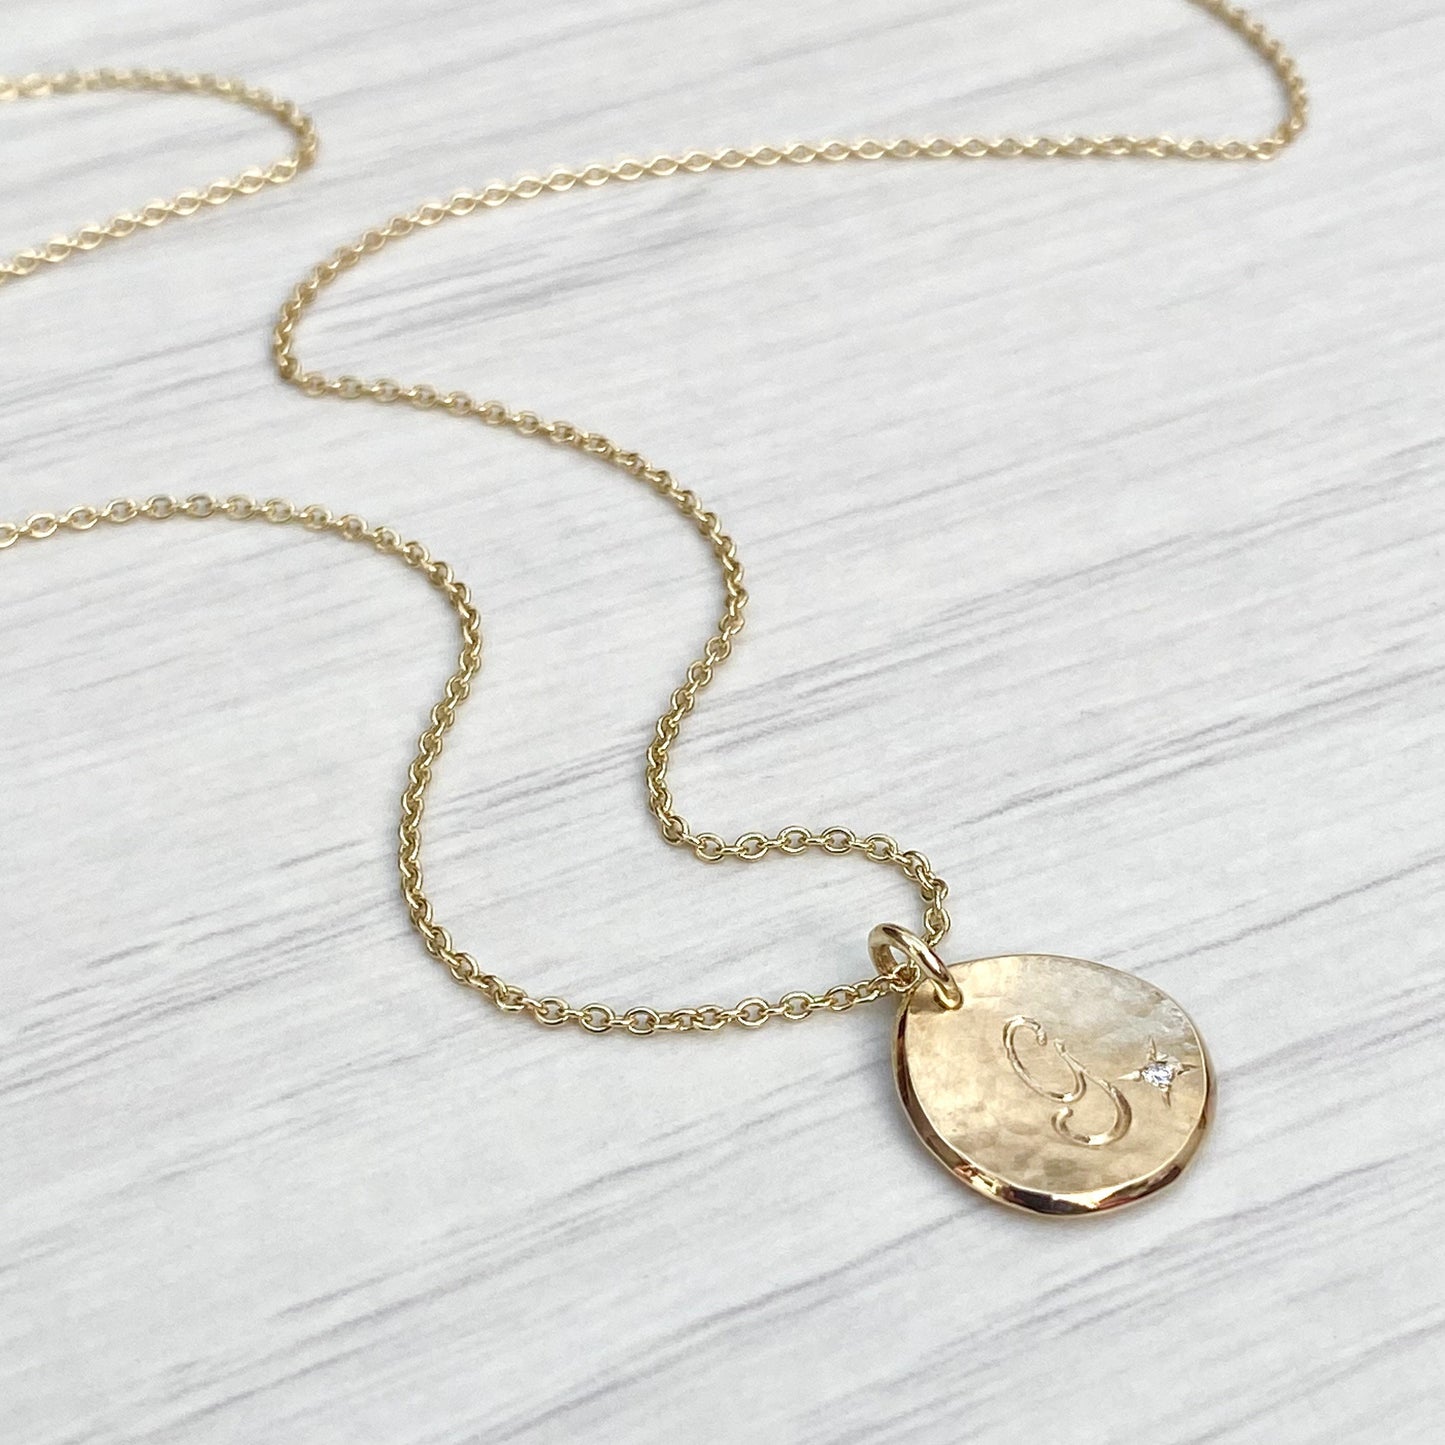 Handmade to order - 9ct solid yellow gold 13mm diamond petal charm pendant on a 1.2mm wide trace chain - Personalised with any letter